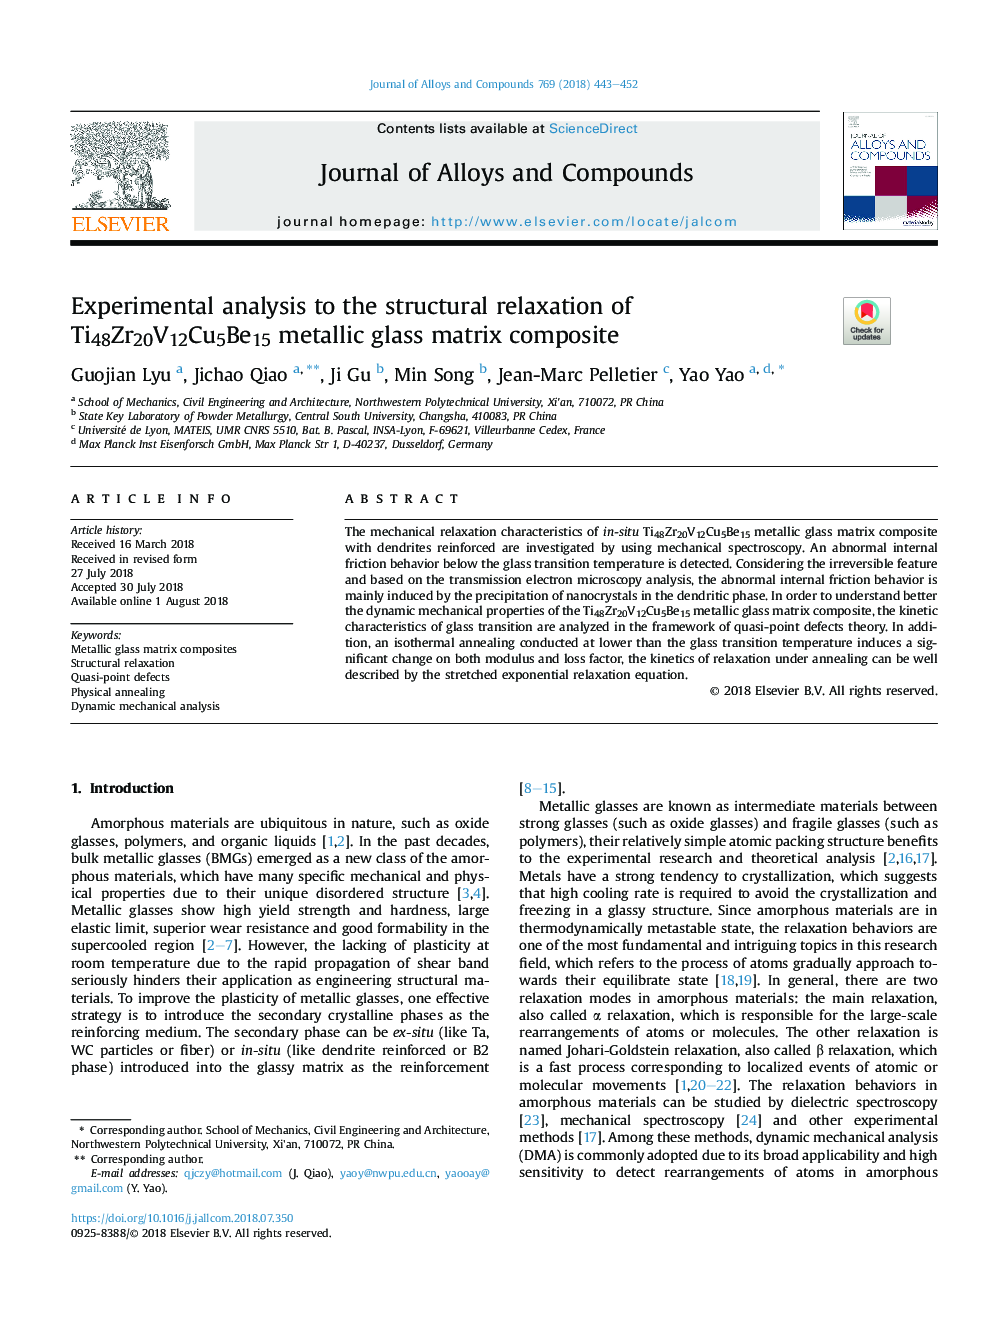 Experimental analysis to the structural relaxation of Ti48Zr20V12Cu5Be15 metallic glass matrix composite